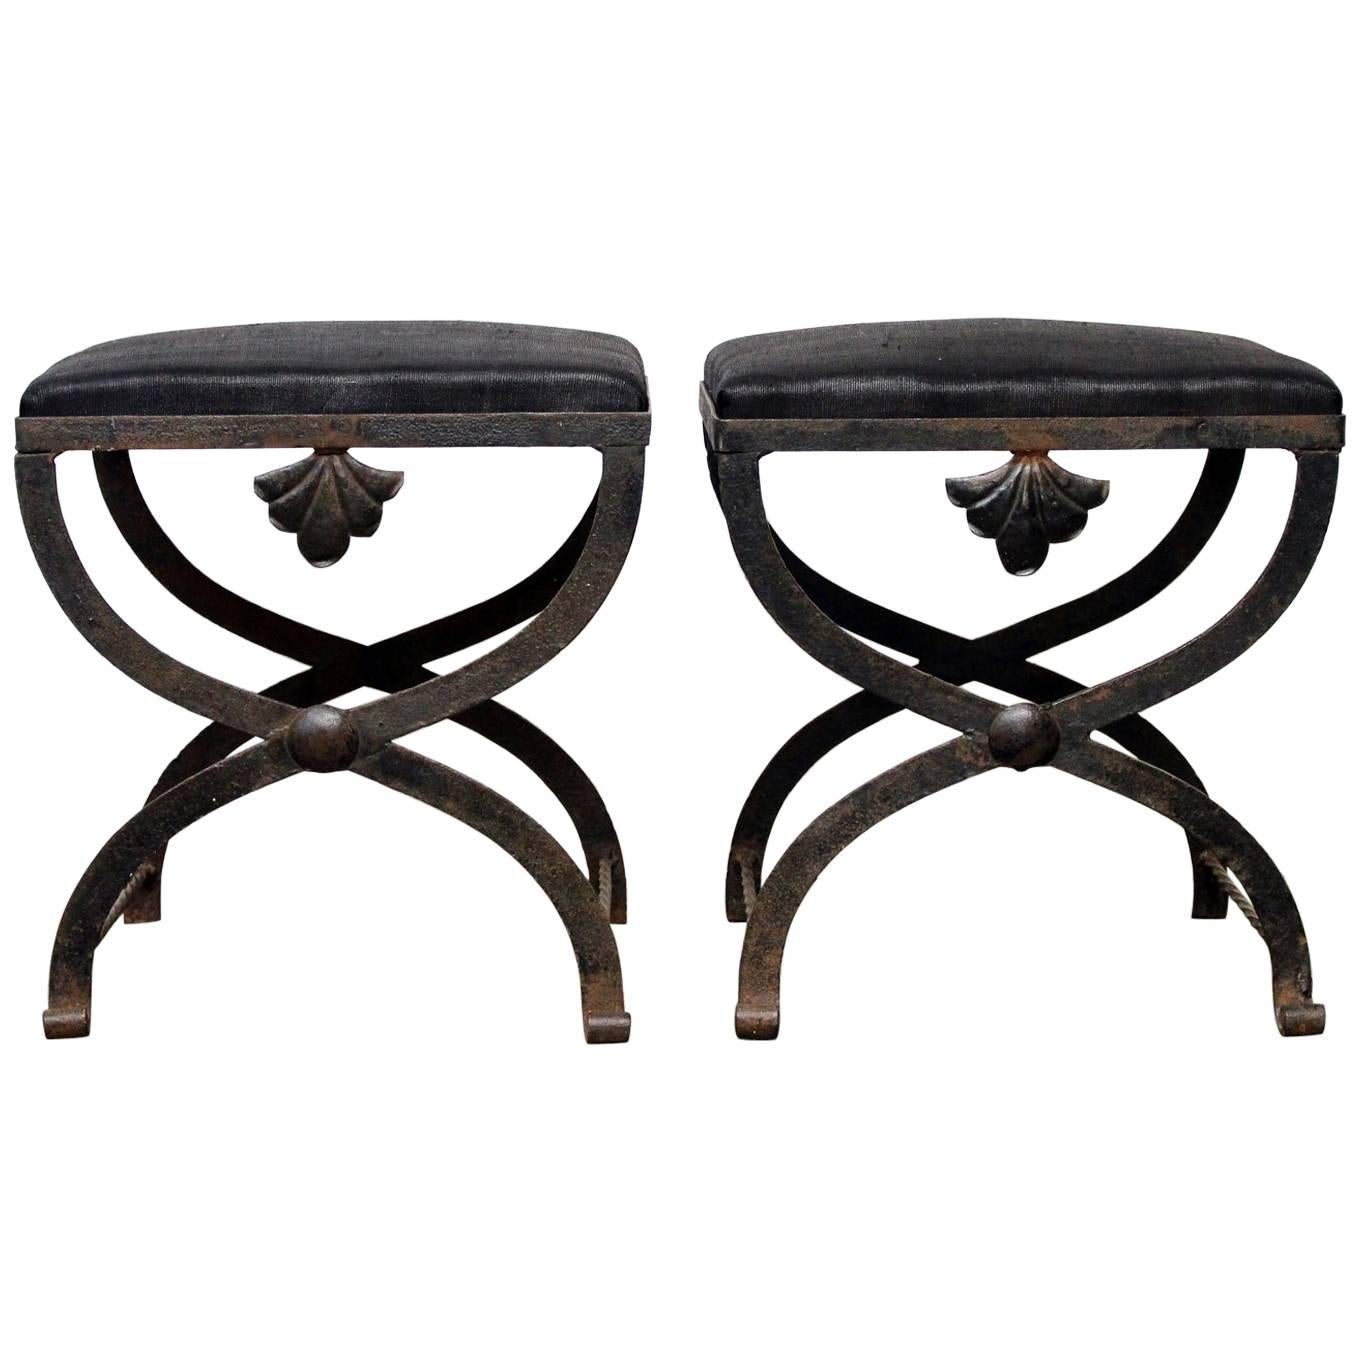 Early 20th Century Pair of Upholstered French X Stretcher Stools with Shell